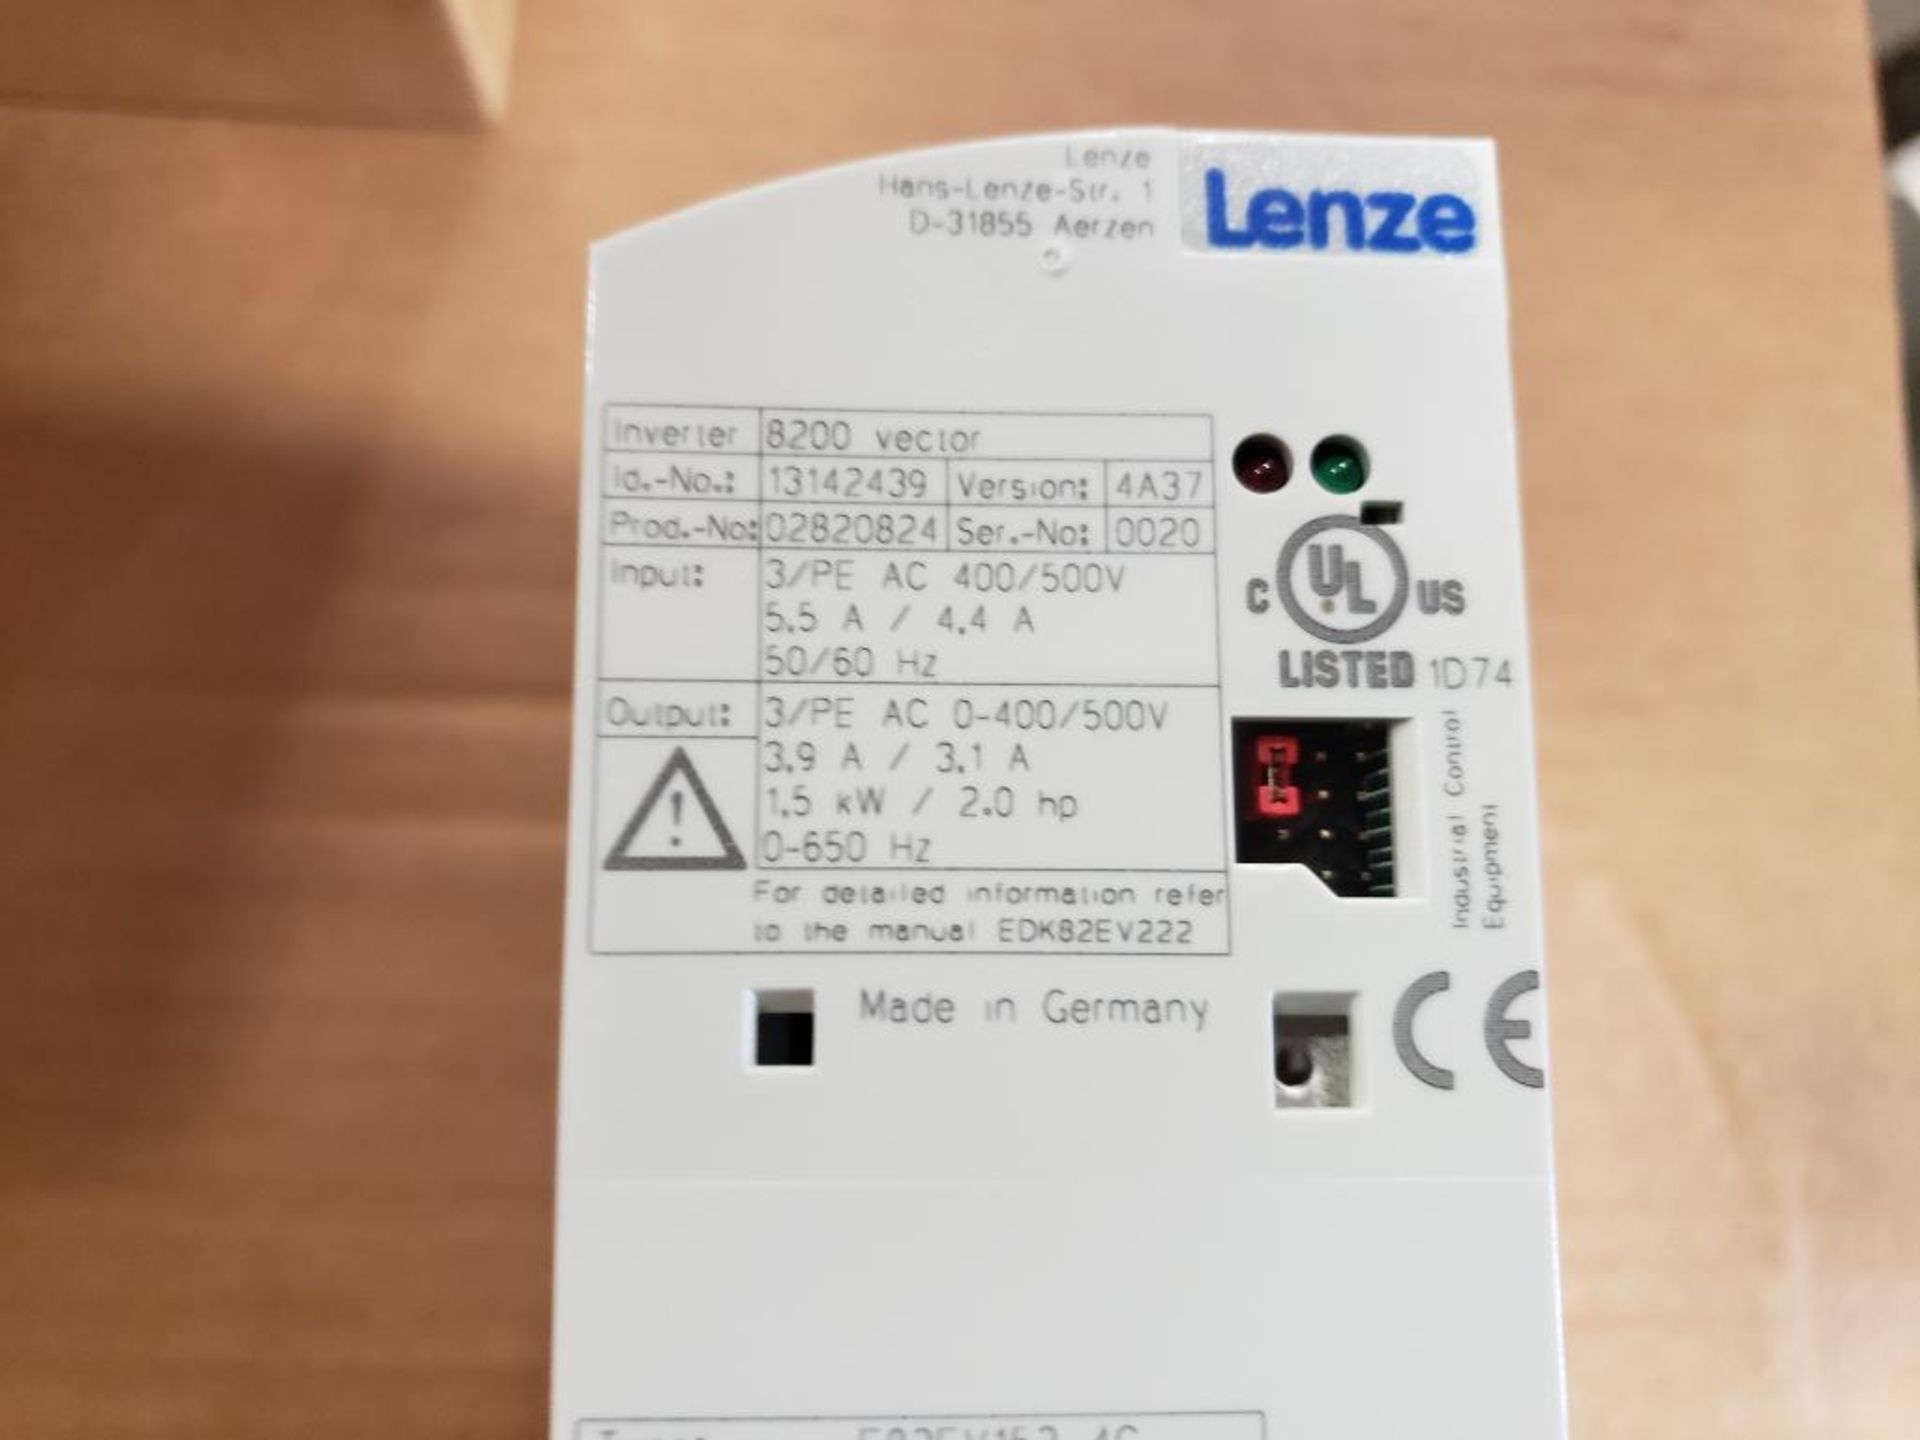 Lenze 8200 Vector drive 13142439. 3PH, 400/500V, 1.5kW, 2HP. - Image 8 of 8